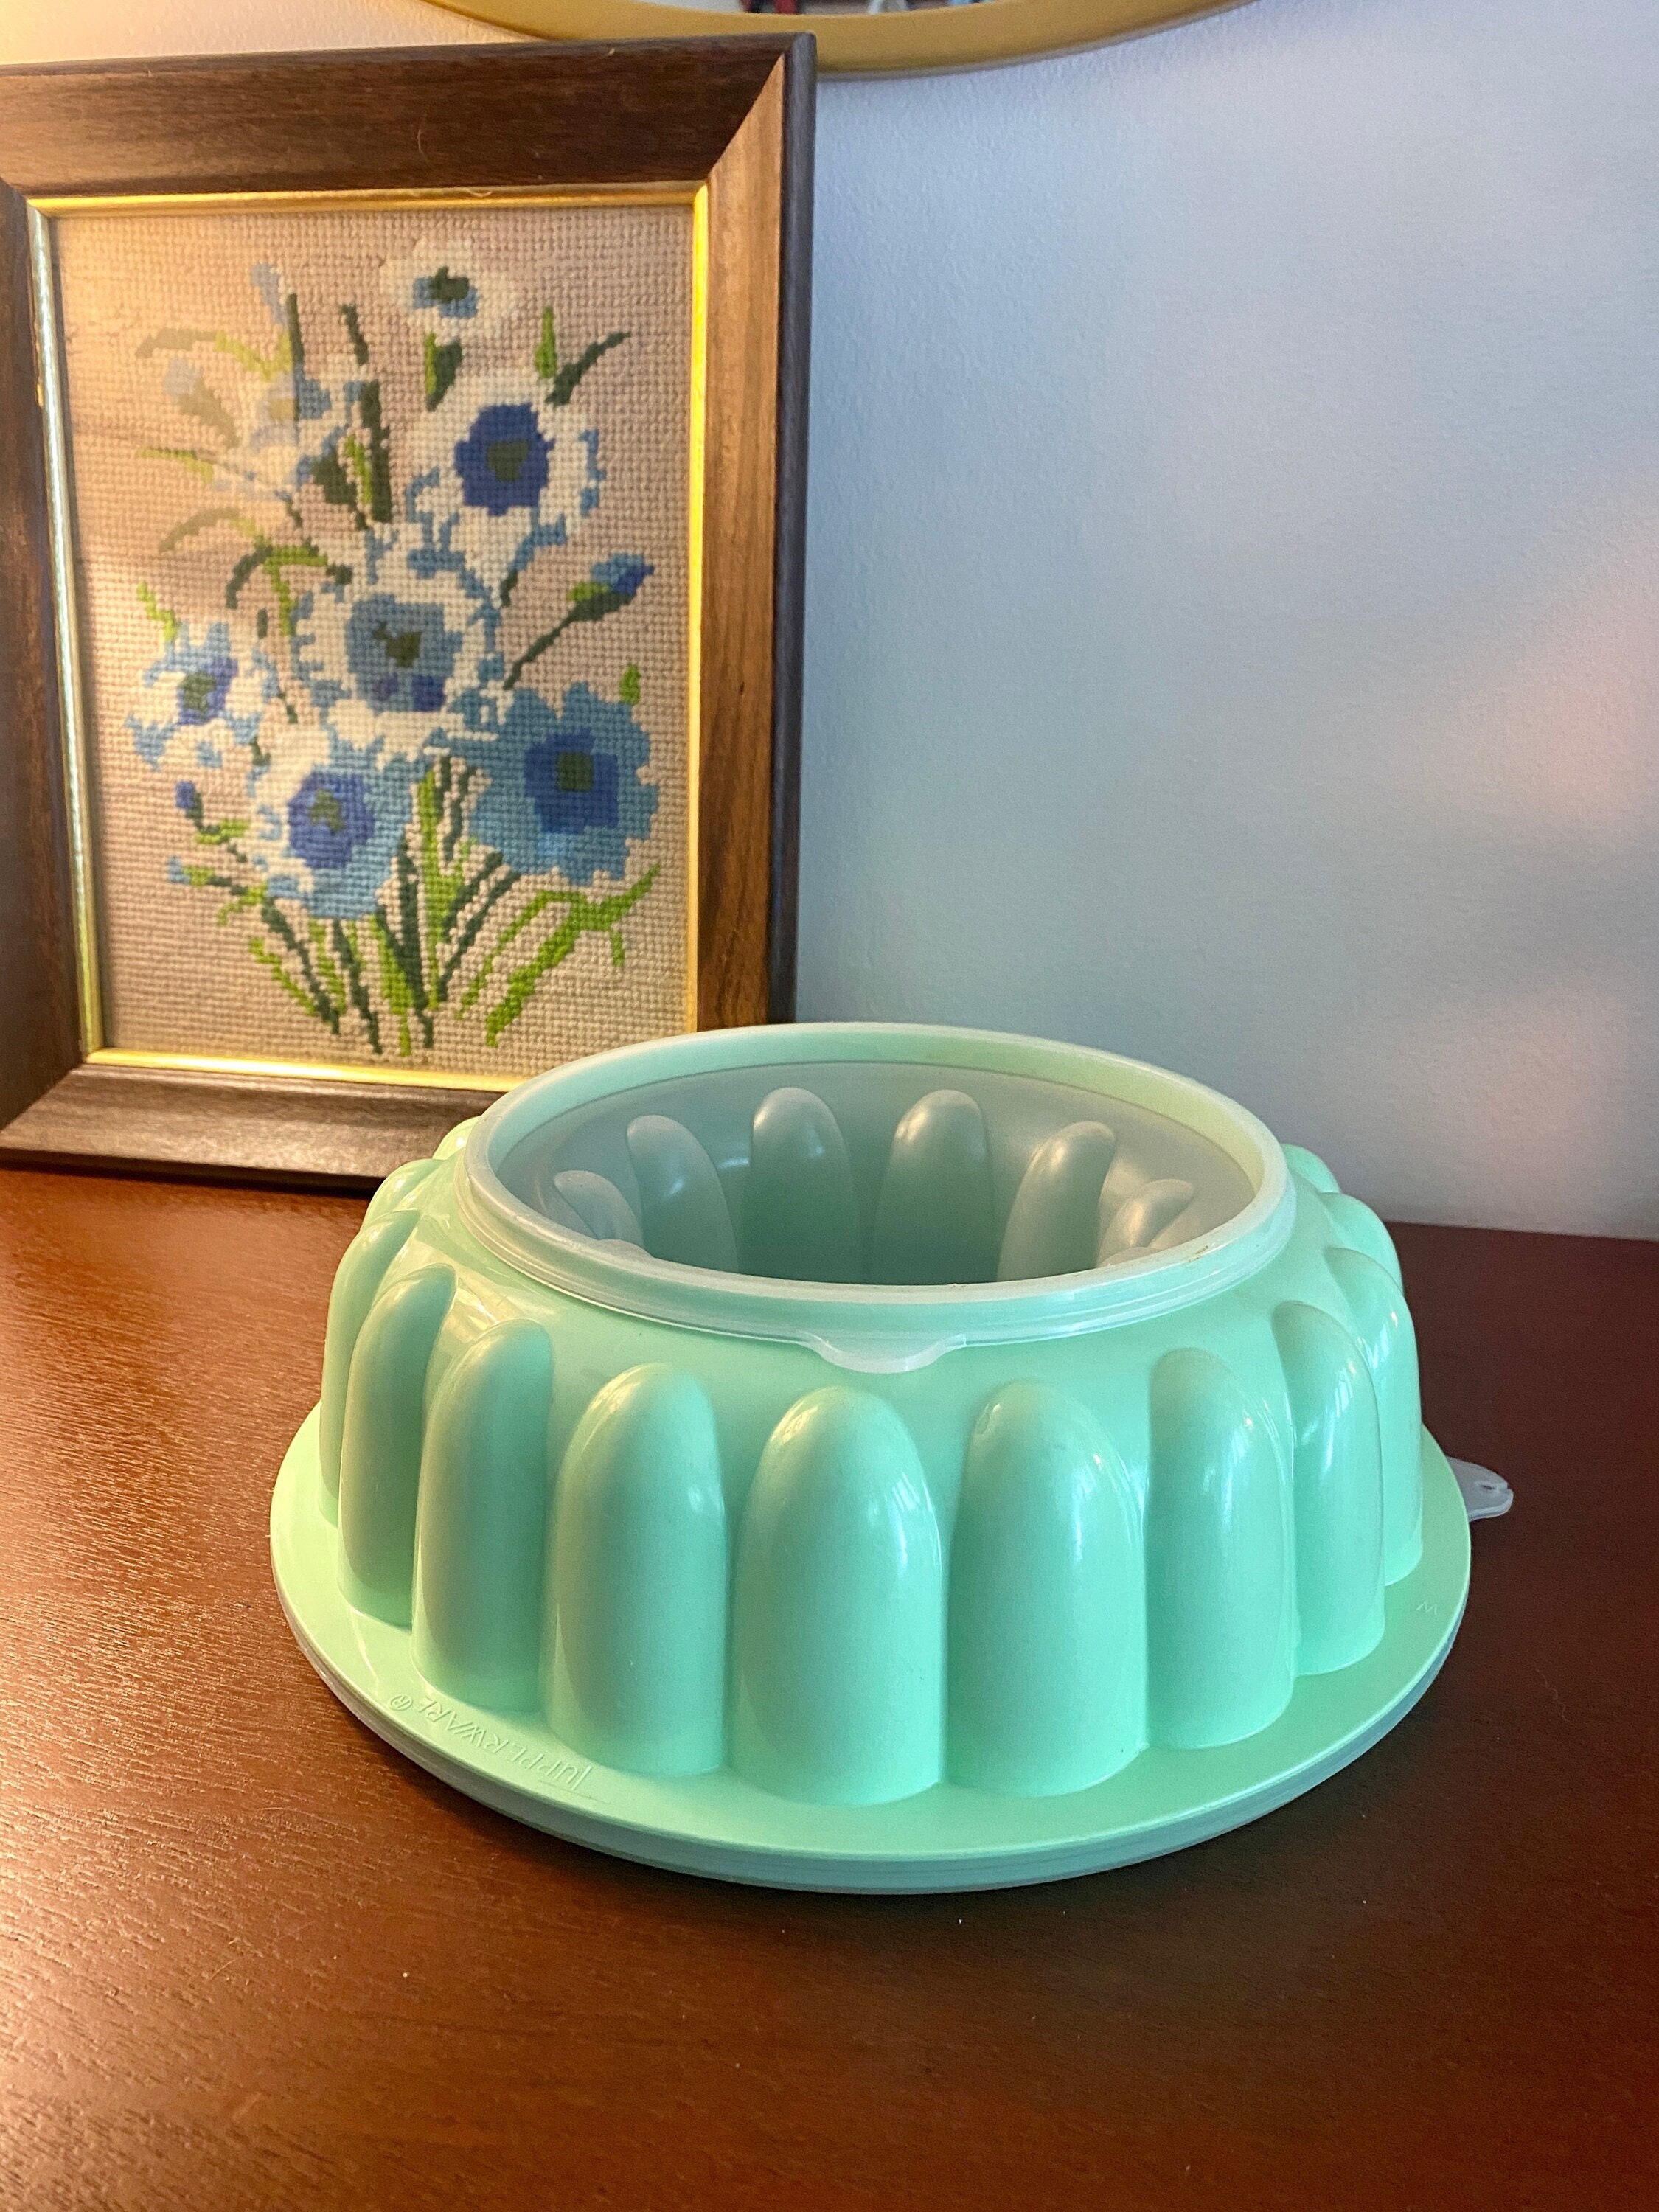 Tupperware 3 Piece Jello Mold with Lid Vintage Light Green